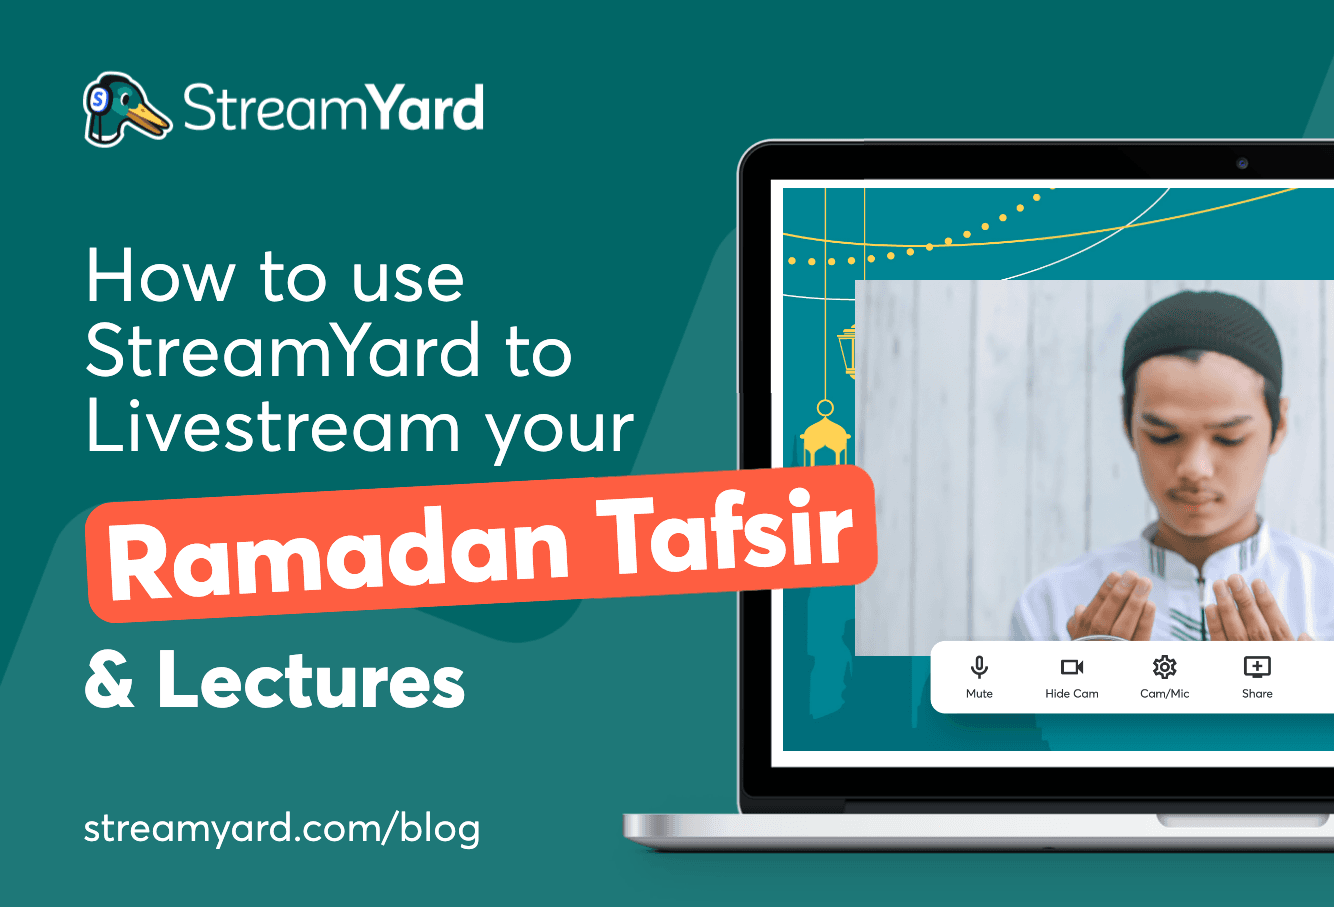 Check out how to live stream your Ramadan Tafsir and lectures using StreamYard and expand your Islamic teachings' reach.